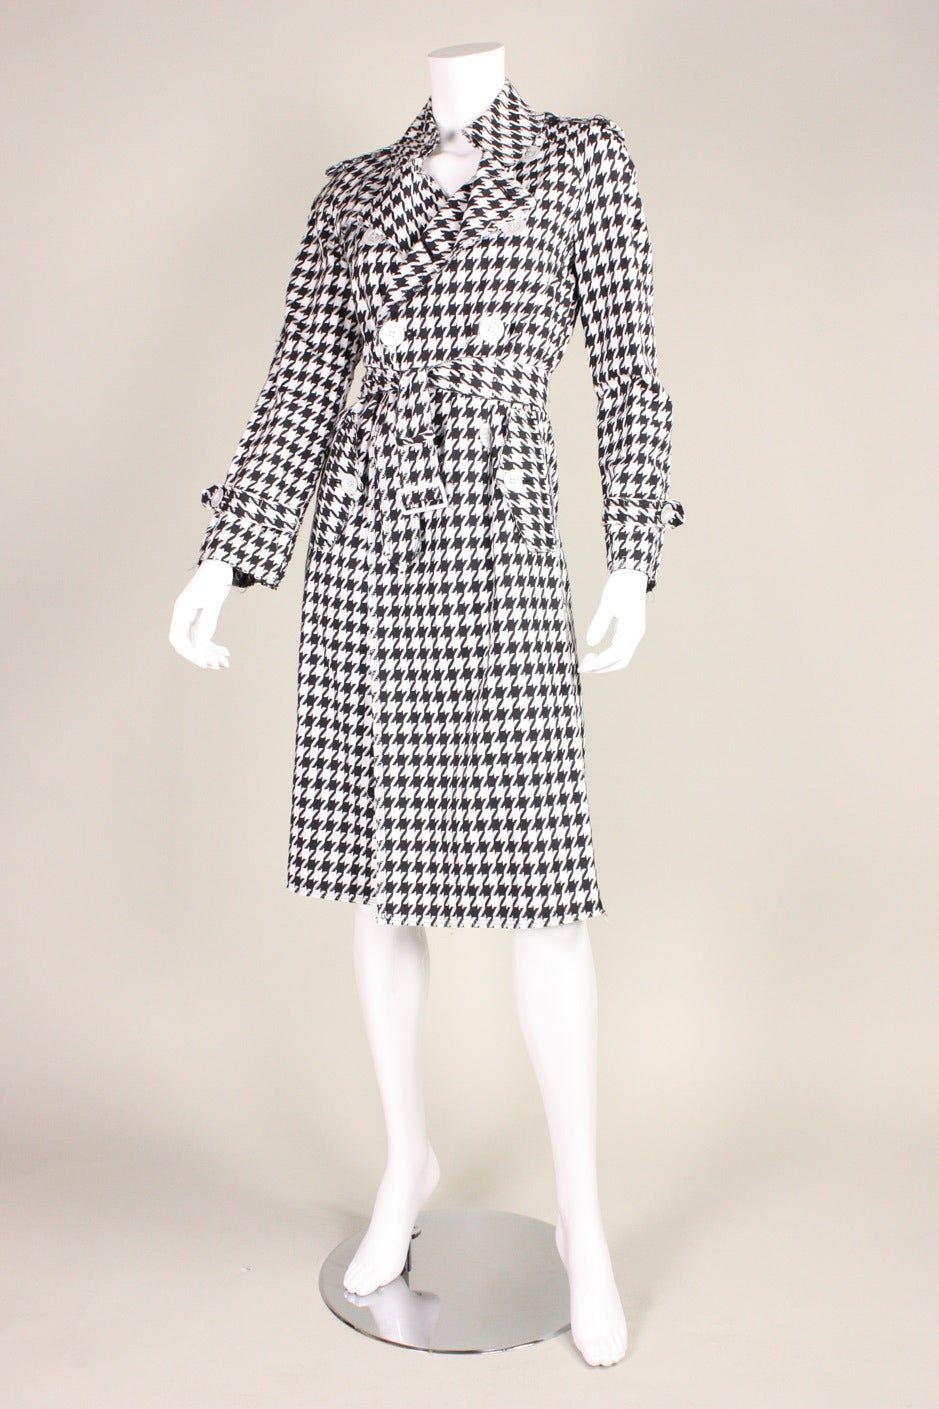 Houndstooth trench from Junya Watanabe for Comme des Garcons dates to 2003.  It is made of loosely woven black and white lightweight cotton. Edges are unfinished. Double breasted with button closures.  Center back vent.  Detached belt. 